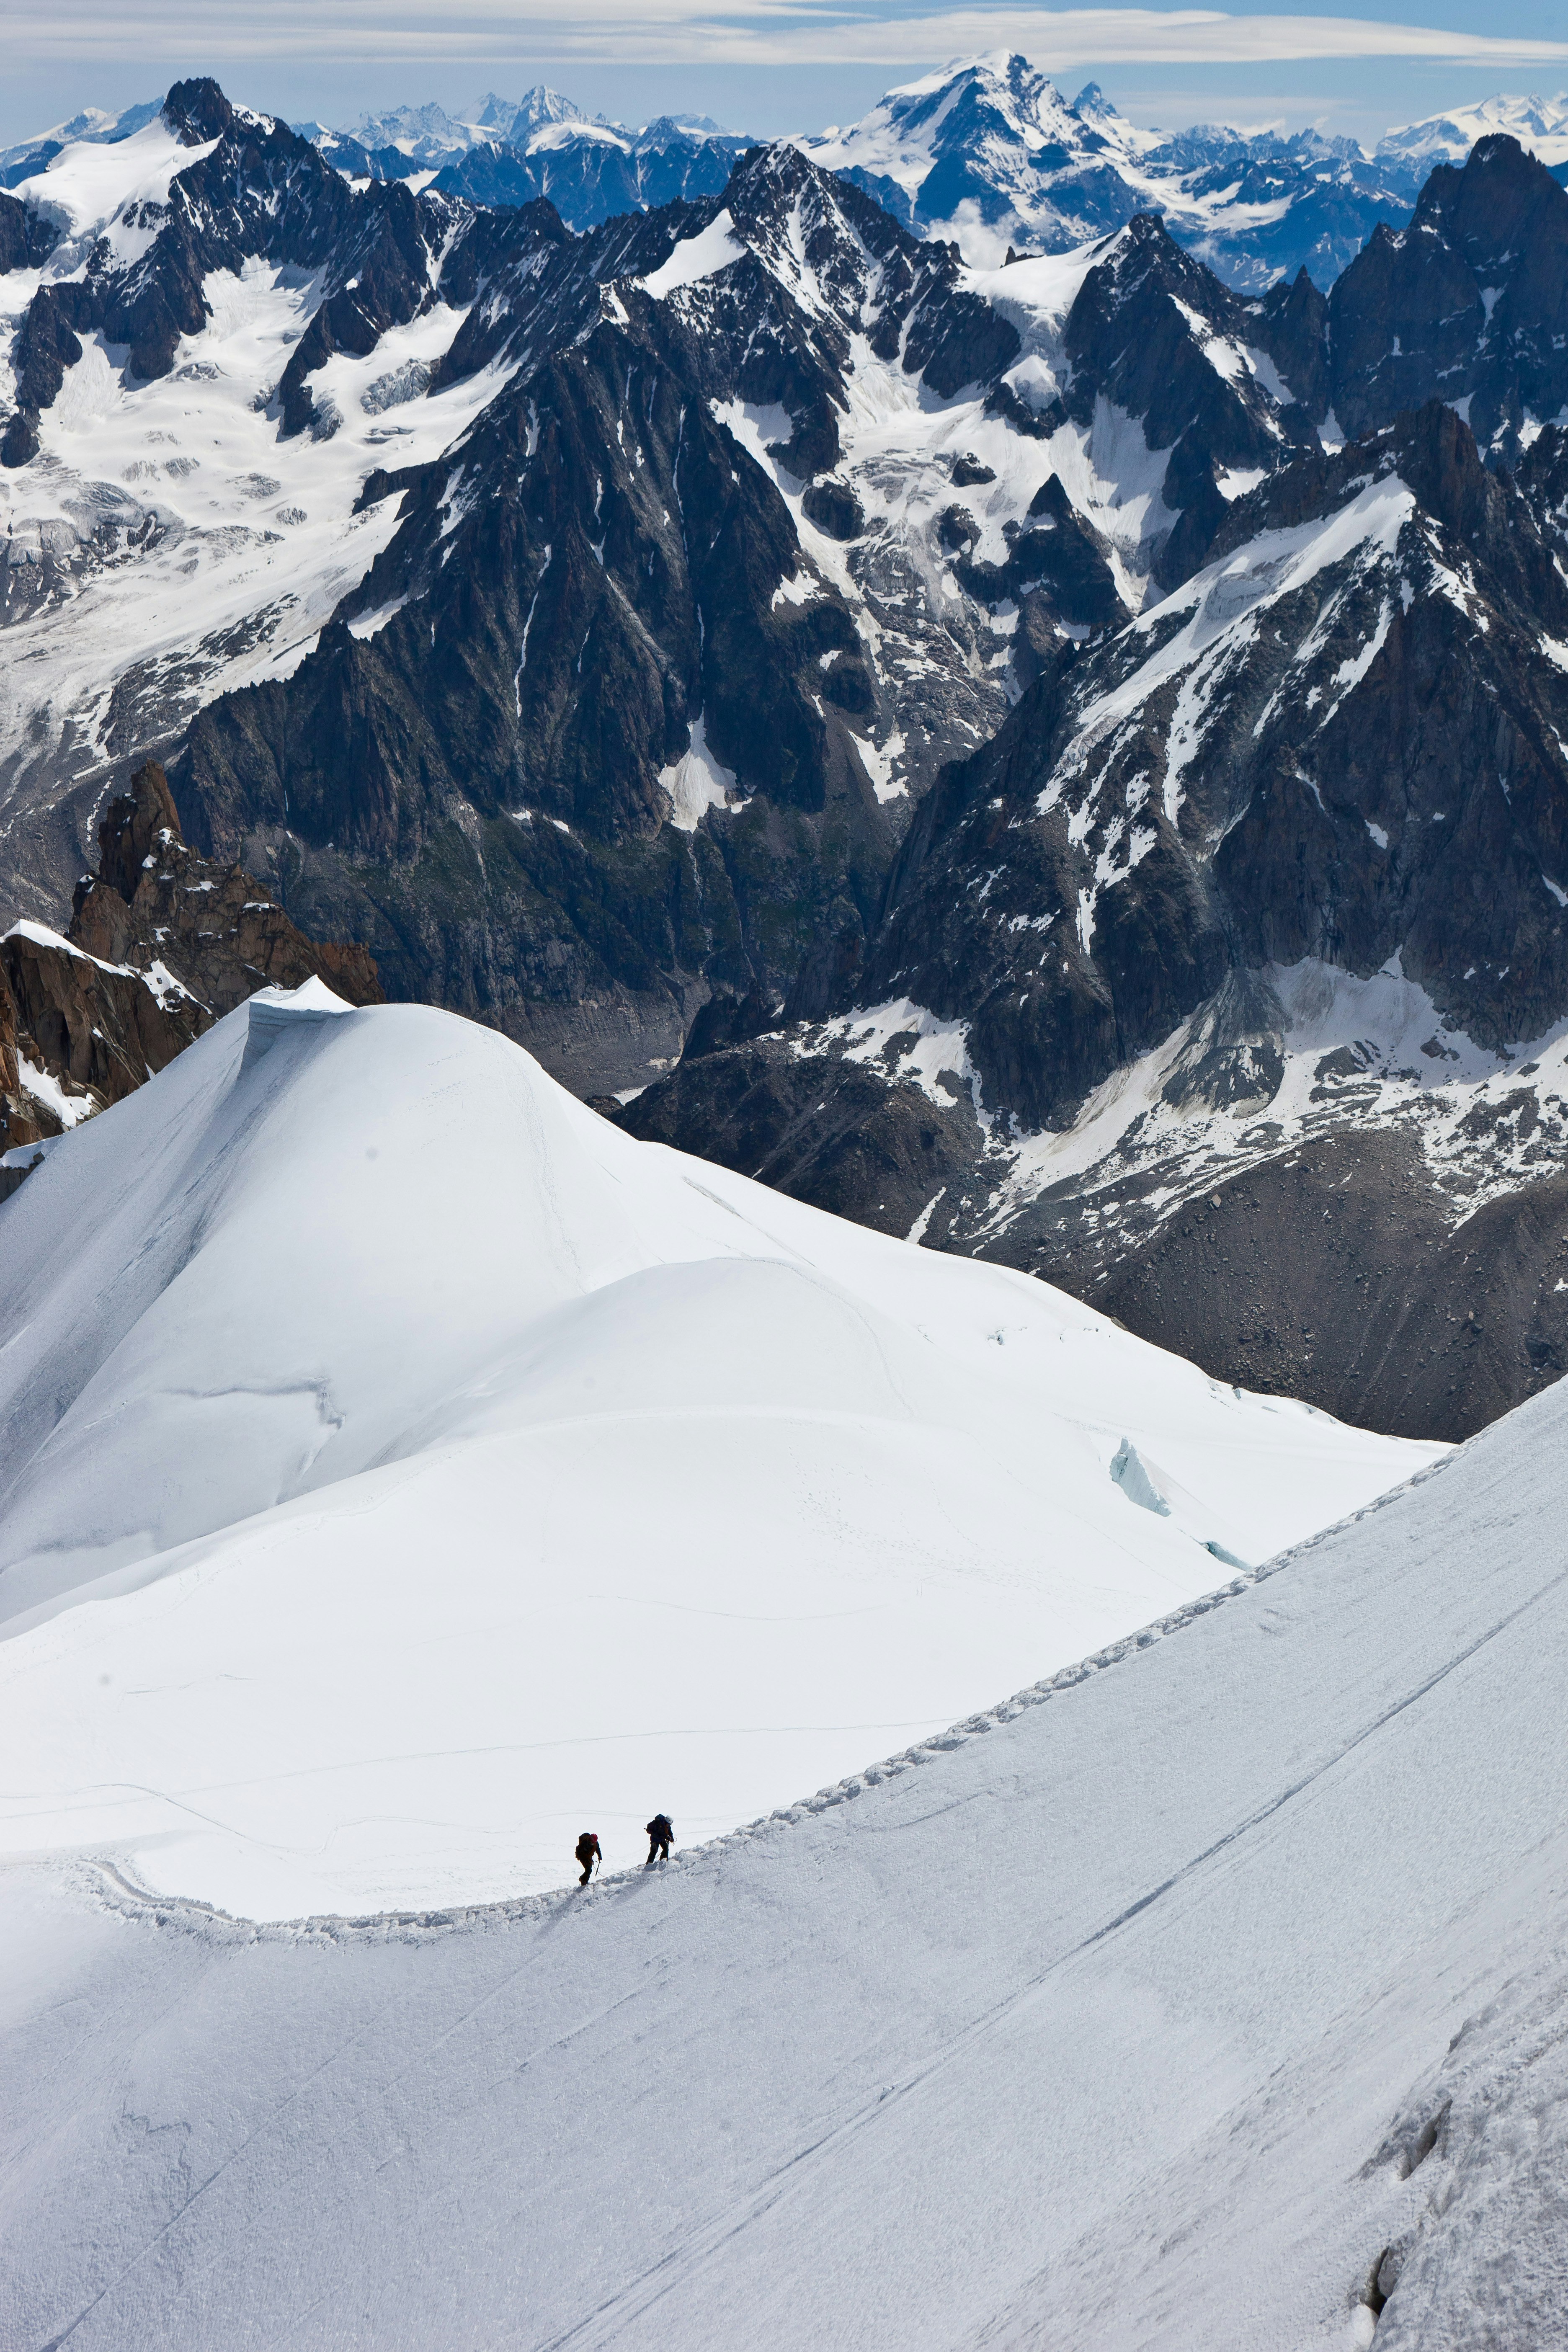 Hard climb on a crest, heading to the Mont Blanc